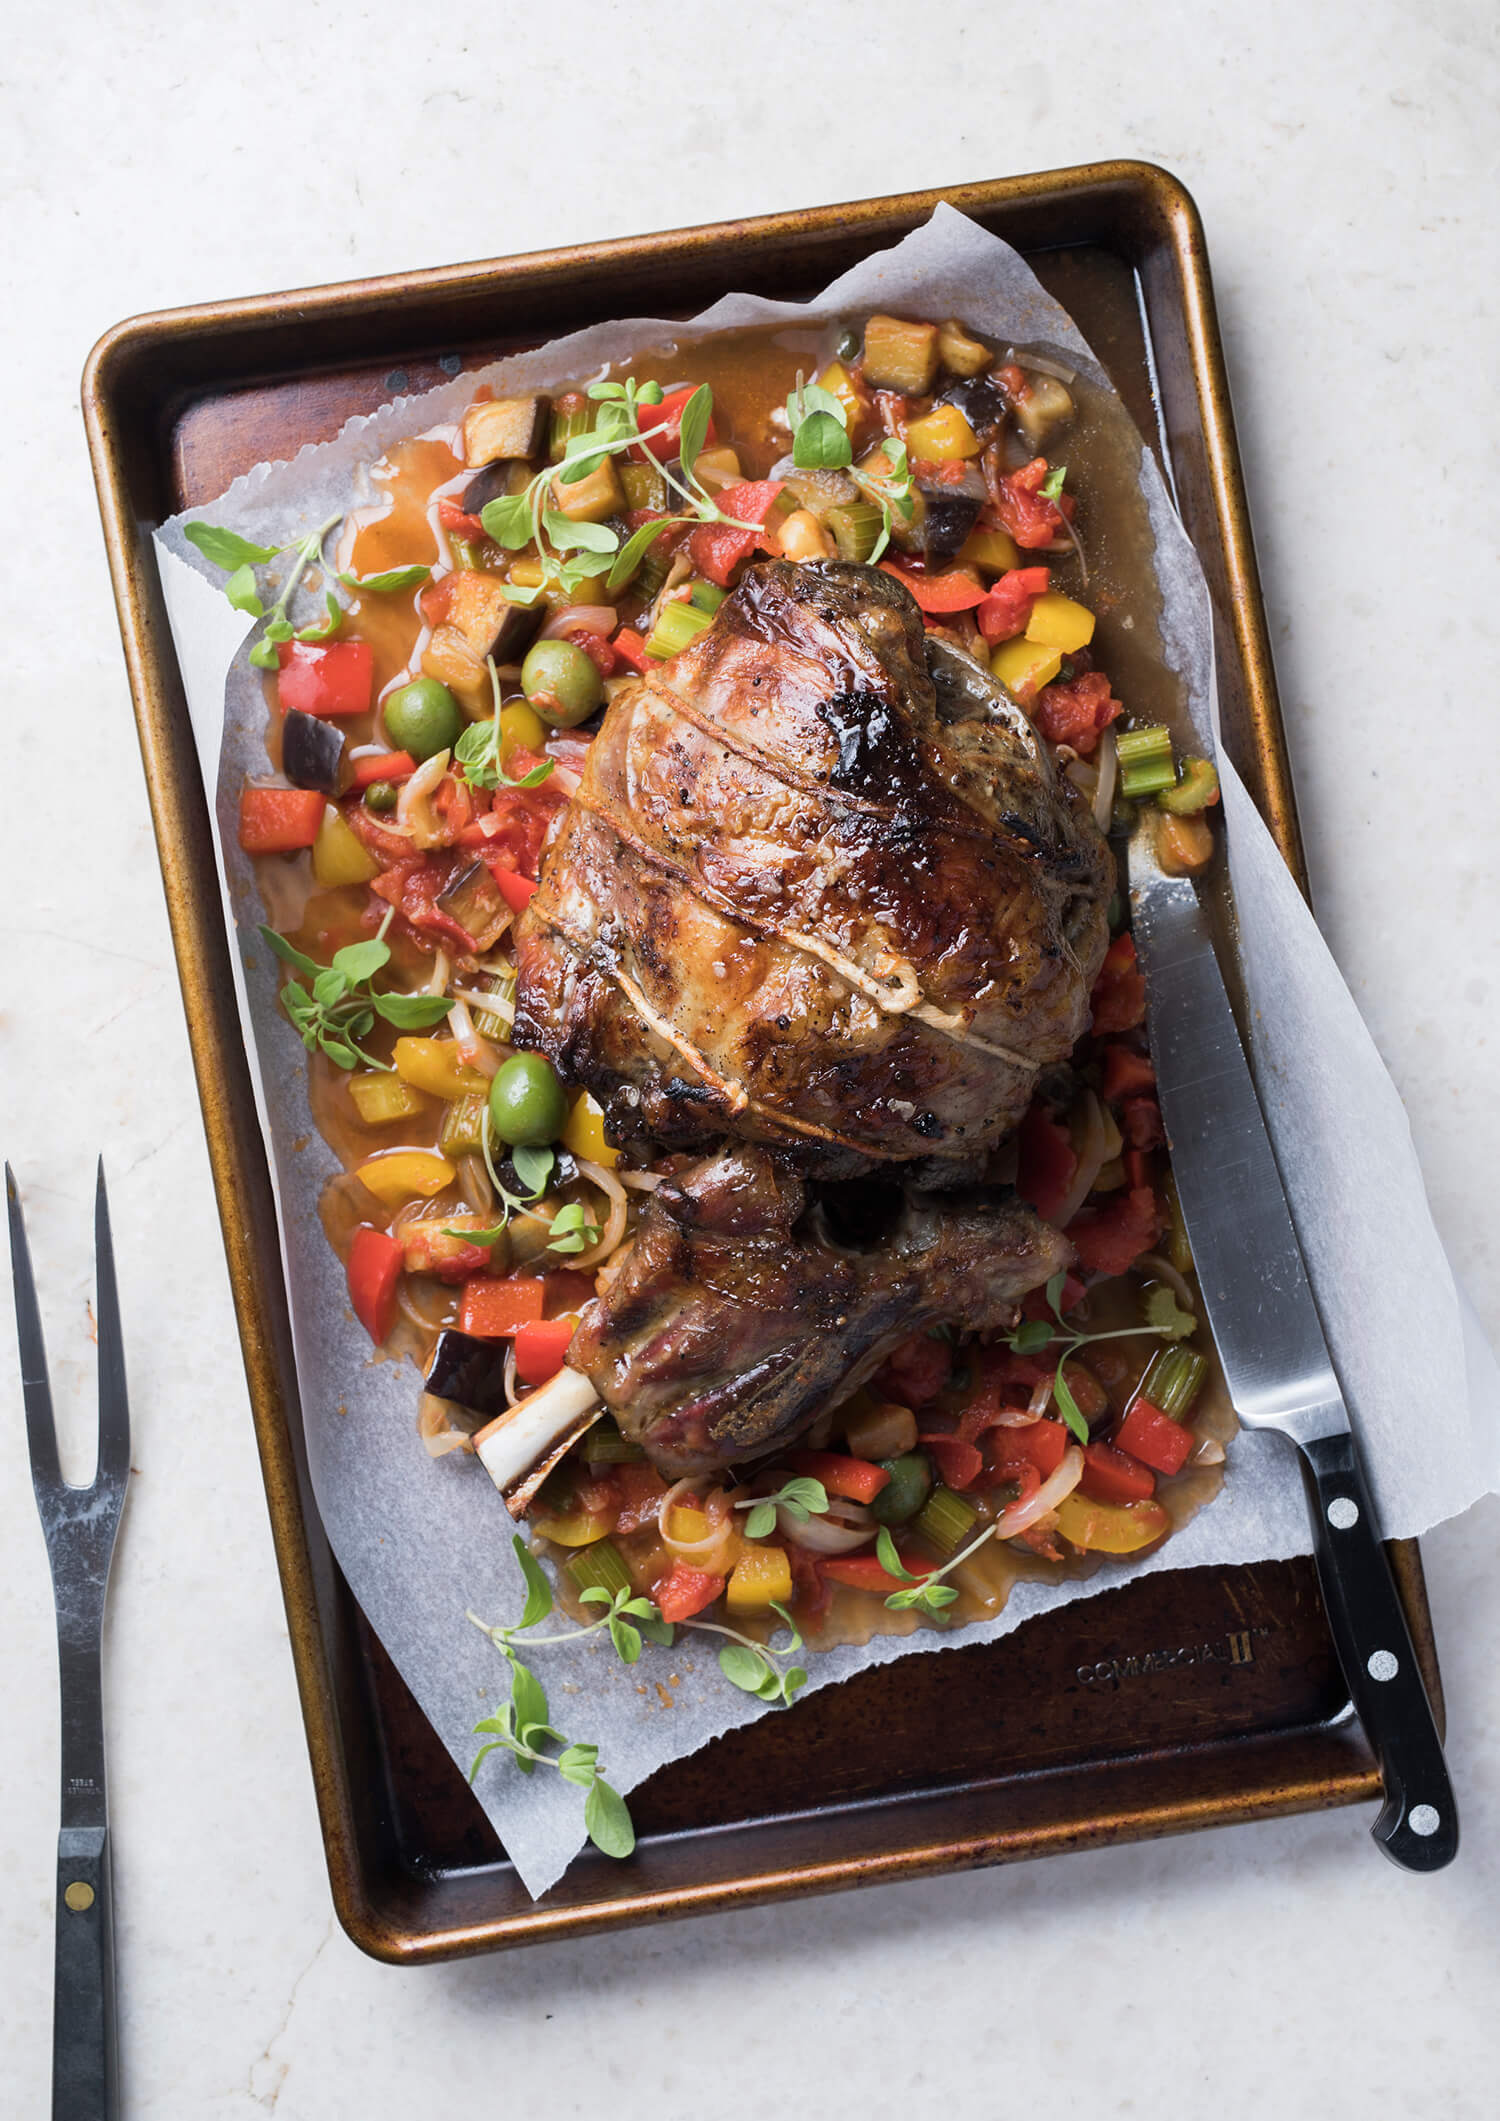 Slow-cooked Shoulder of Lamb with Late Summer Vegetables